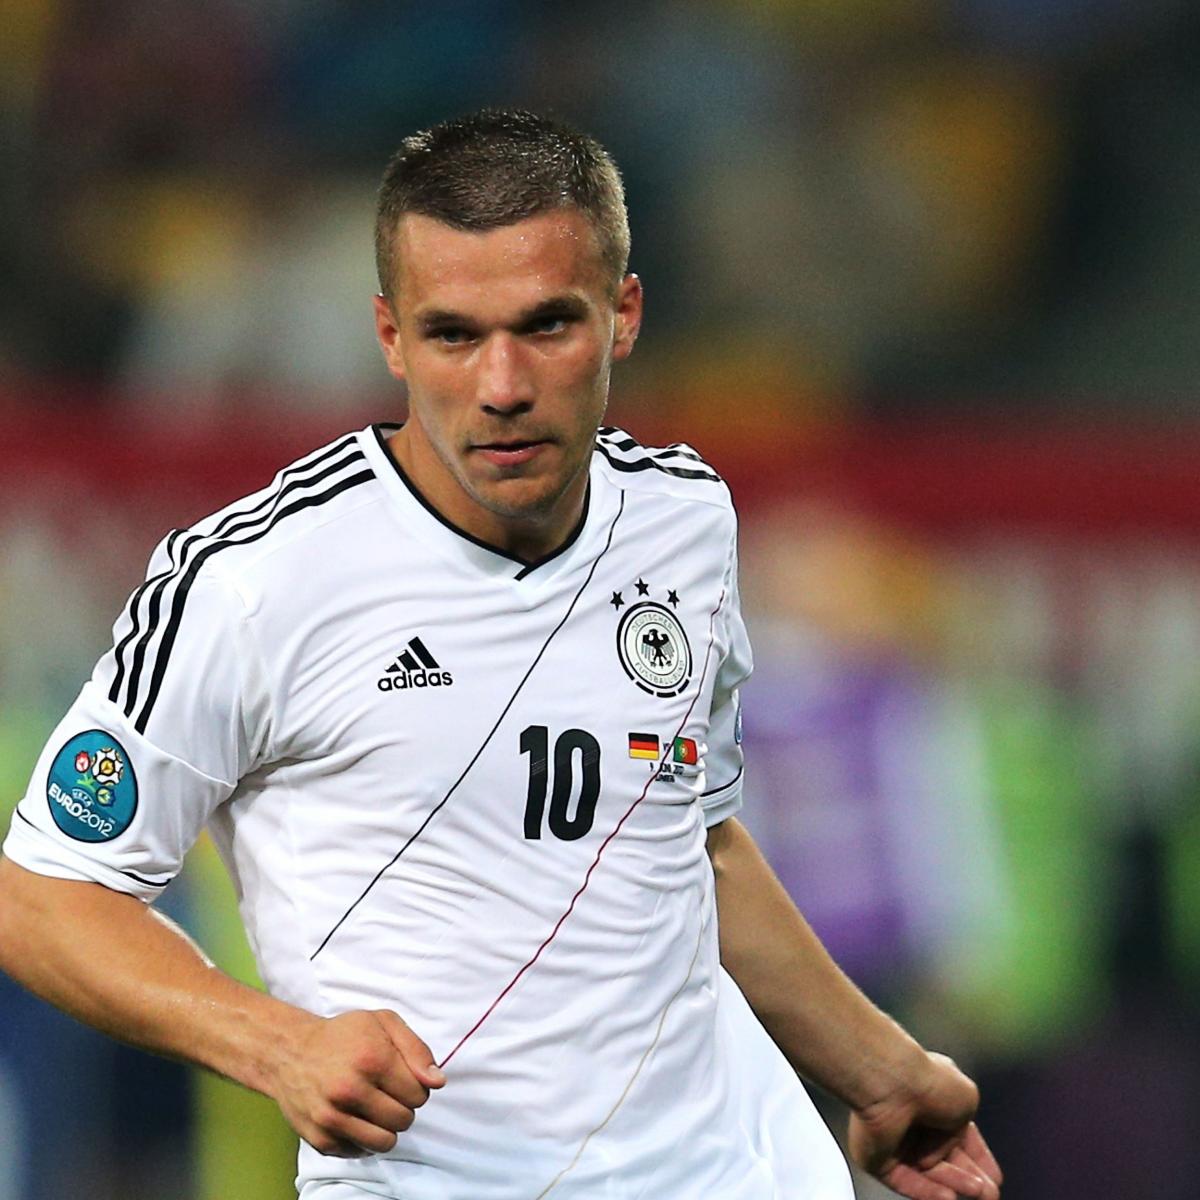 Arsenal: Gunner Fans Should Be Cautious with Lukas Podolski ...